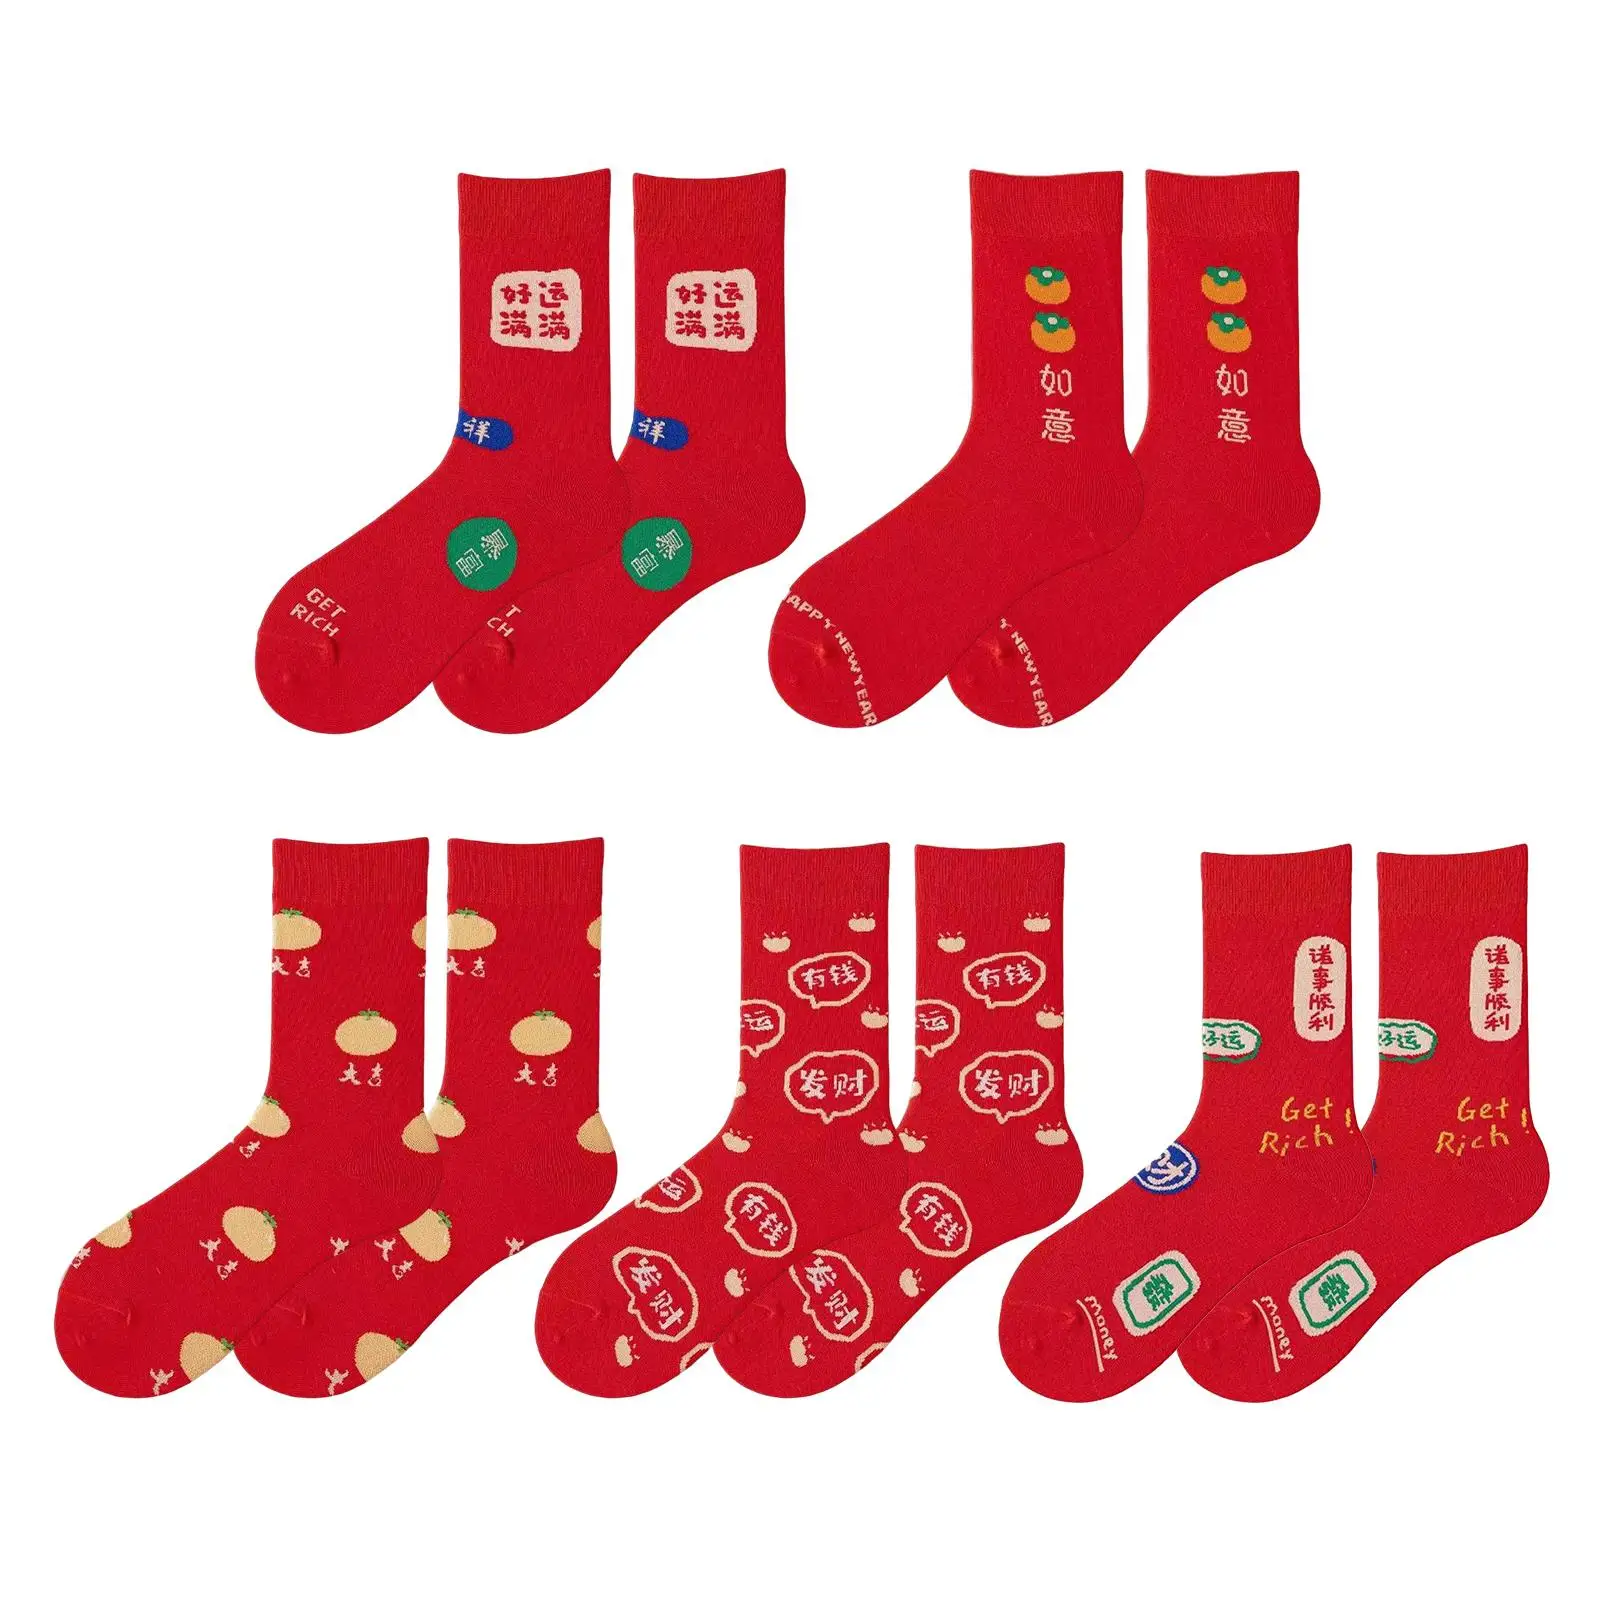 5 Pairs Red Socks with Chinese Characters Novelty Gifts Breathable Soft Warm Stockings Ankle Socks for Spring Festival Socks